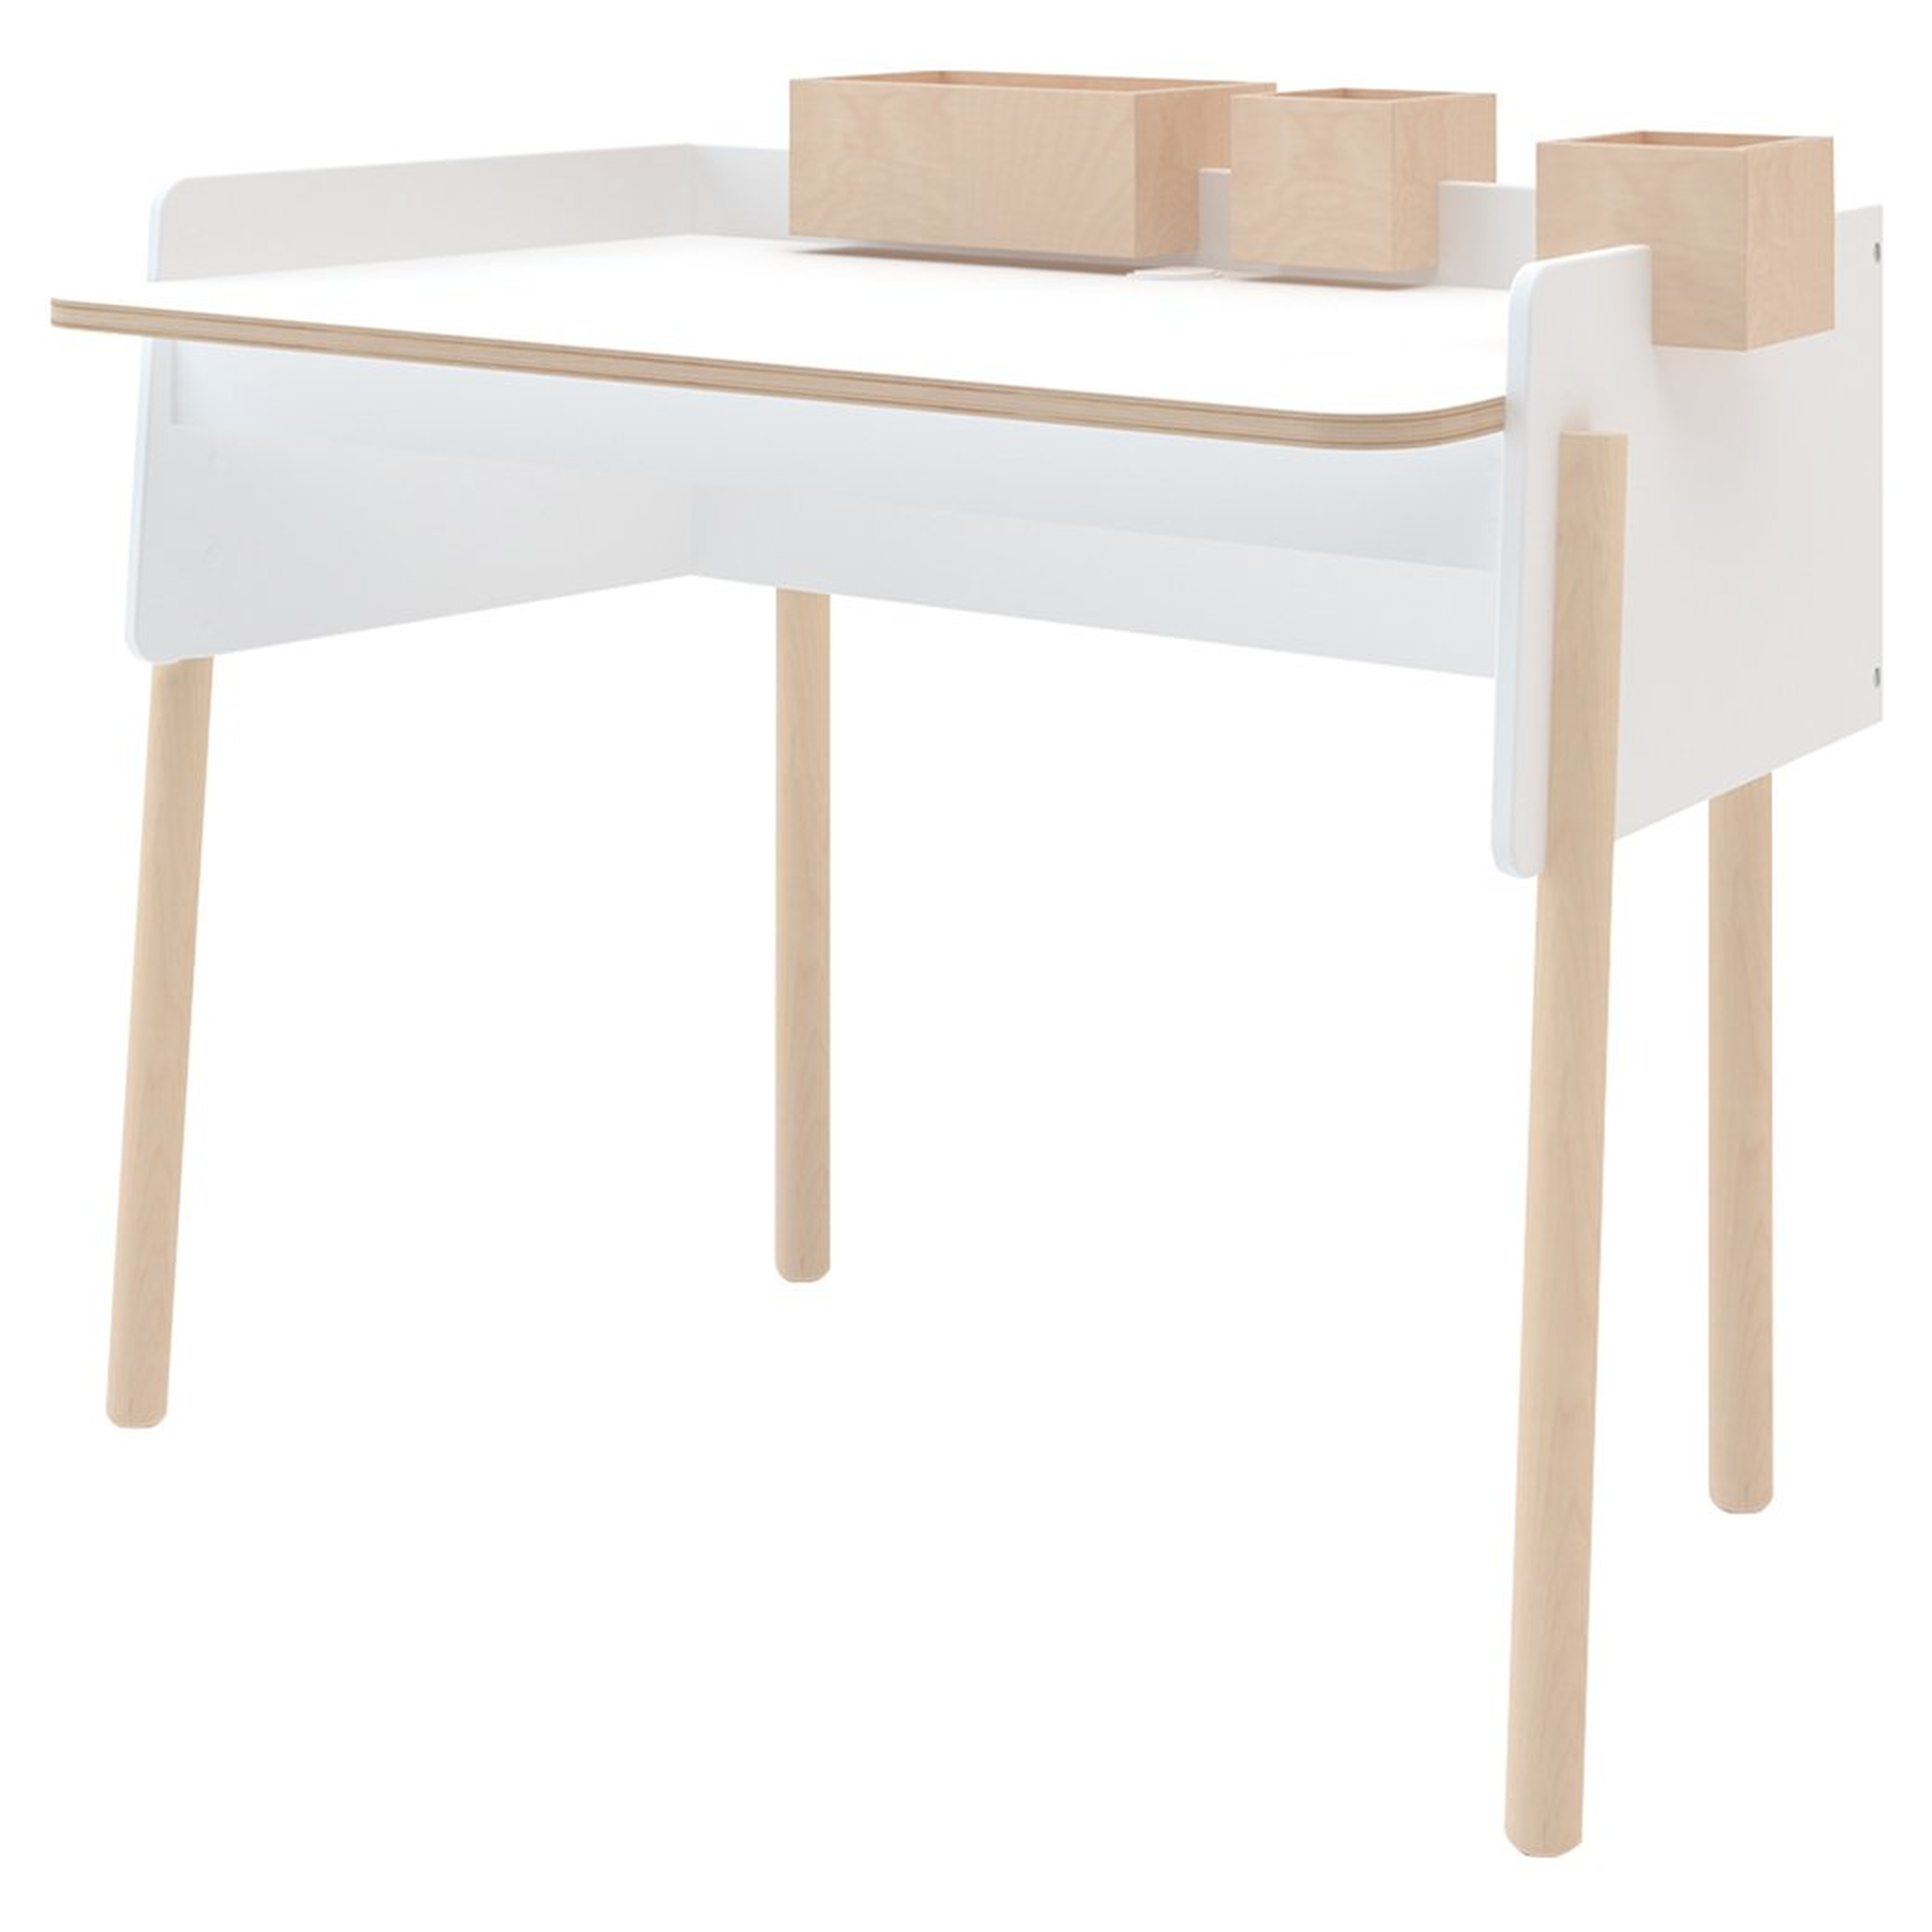 Brooklyn Oeuf Adjustable White Birch Desk - Kathy Kuo Home